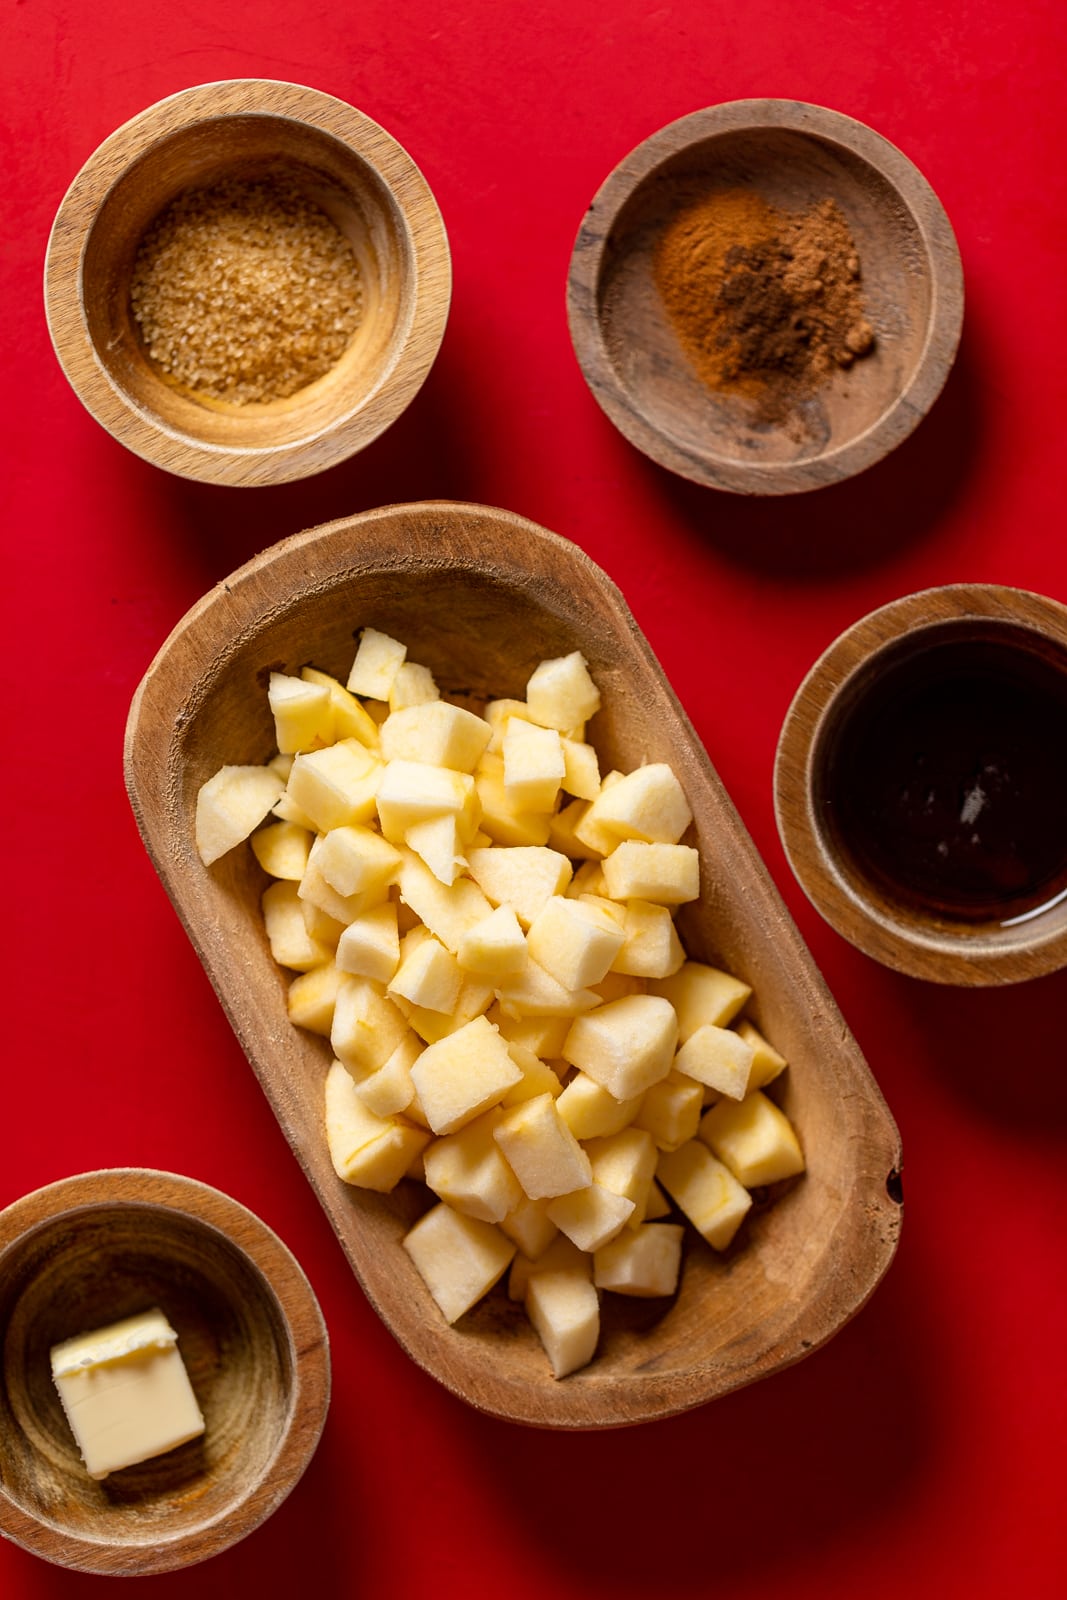 Ingredients for Apple Hand Pies including apple pieces, cinnamon, and butter